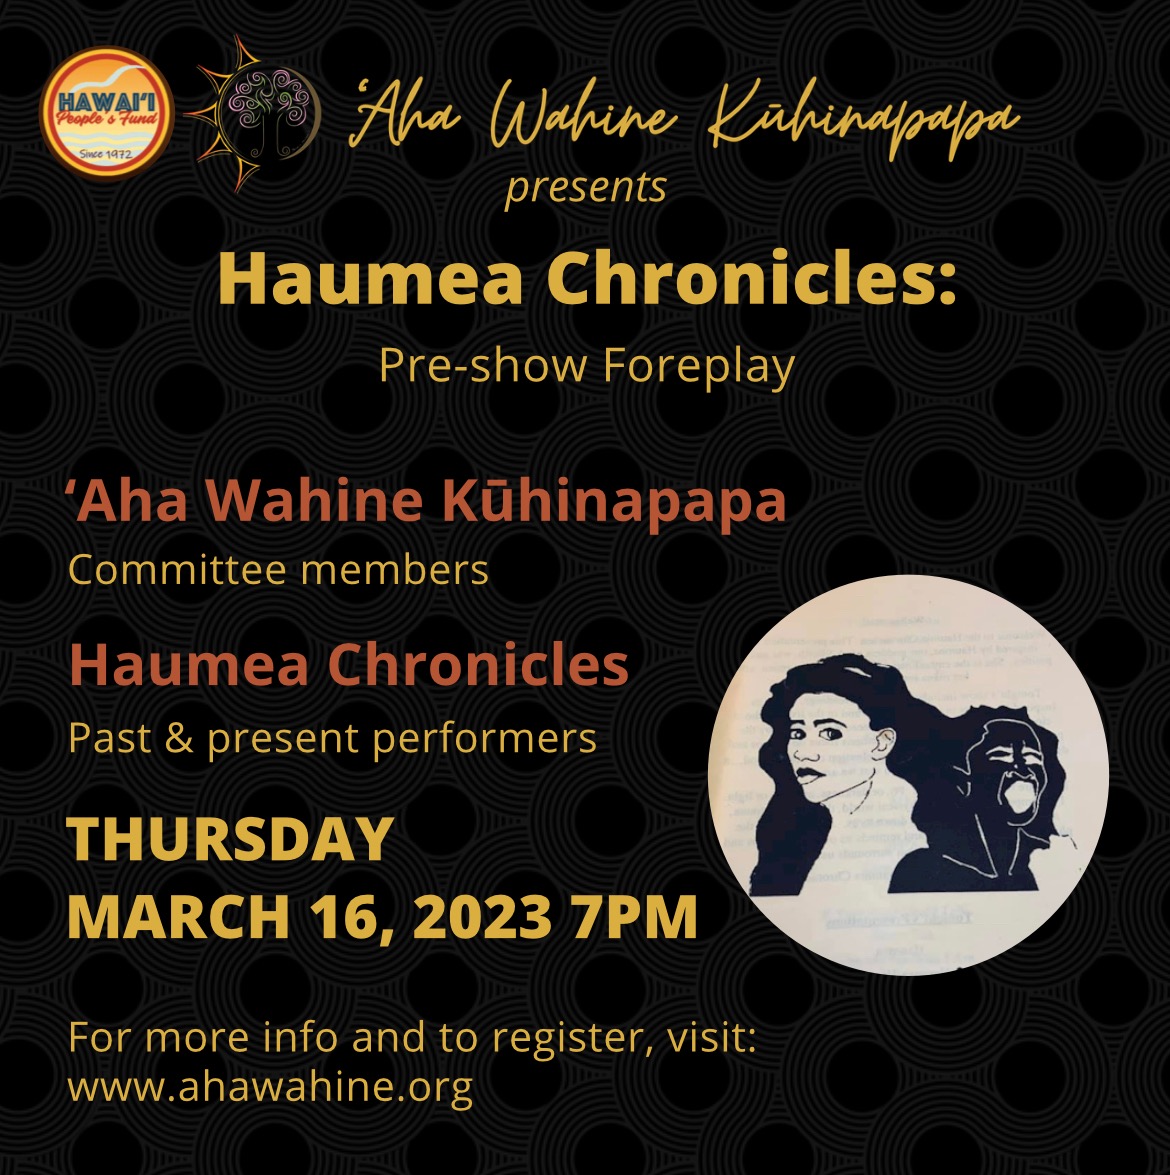 Foreplay - 'Aha Wahine Kūhinapapa and the Haumea Chronicles cast preview what is to come on March 26 & 27. Join the conversation!